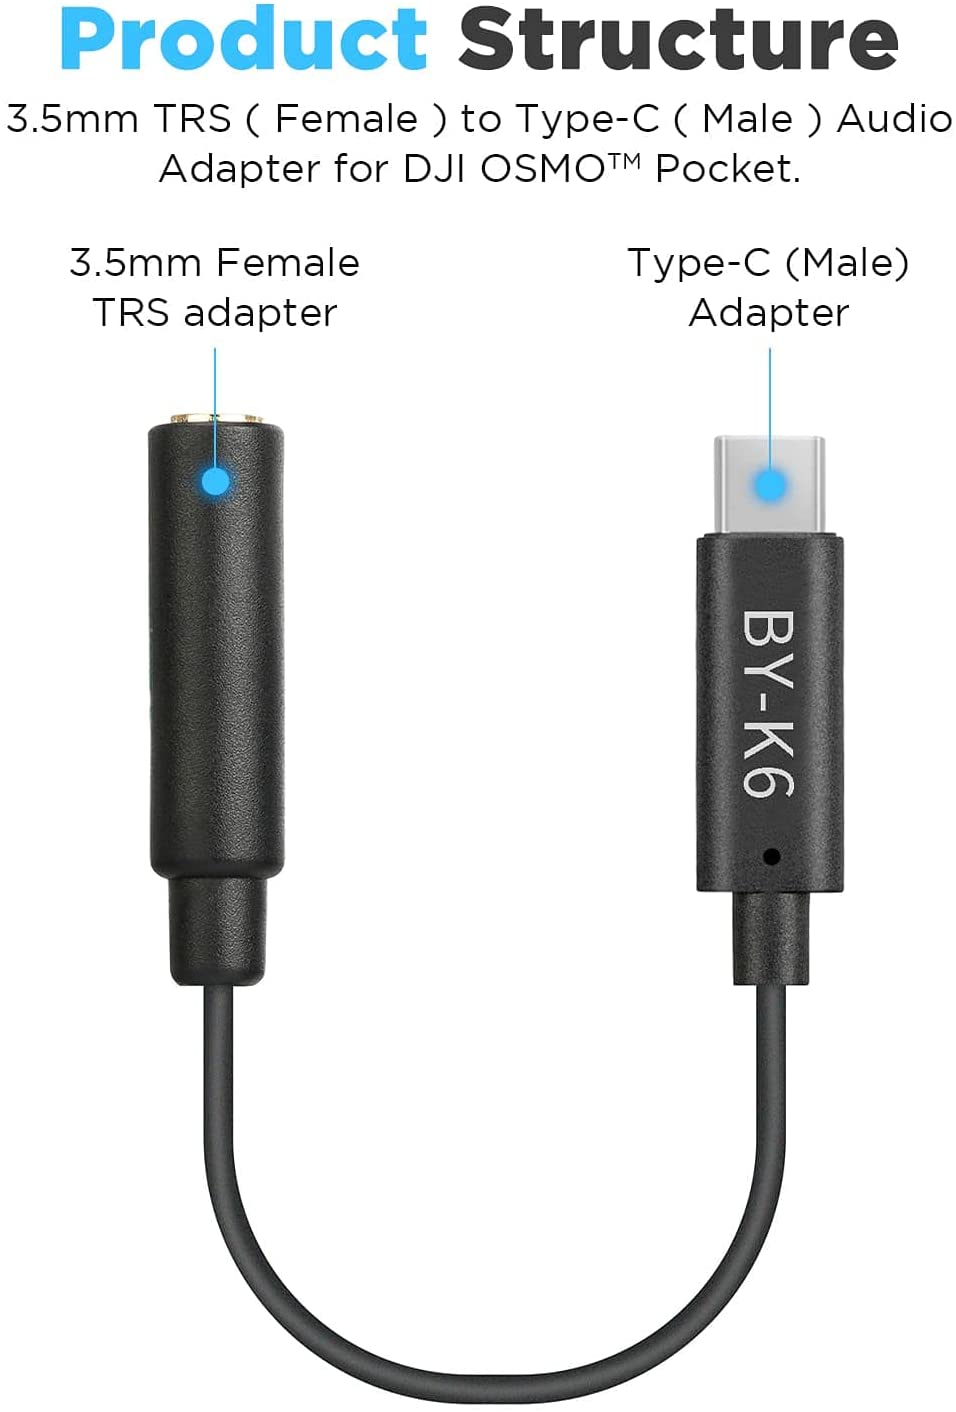 Boya BY-K6 3.5mm TRS (Female) to USB Type-C (Male) Audio Adapter for DJI OSMO" Pocket